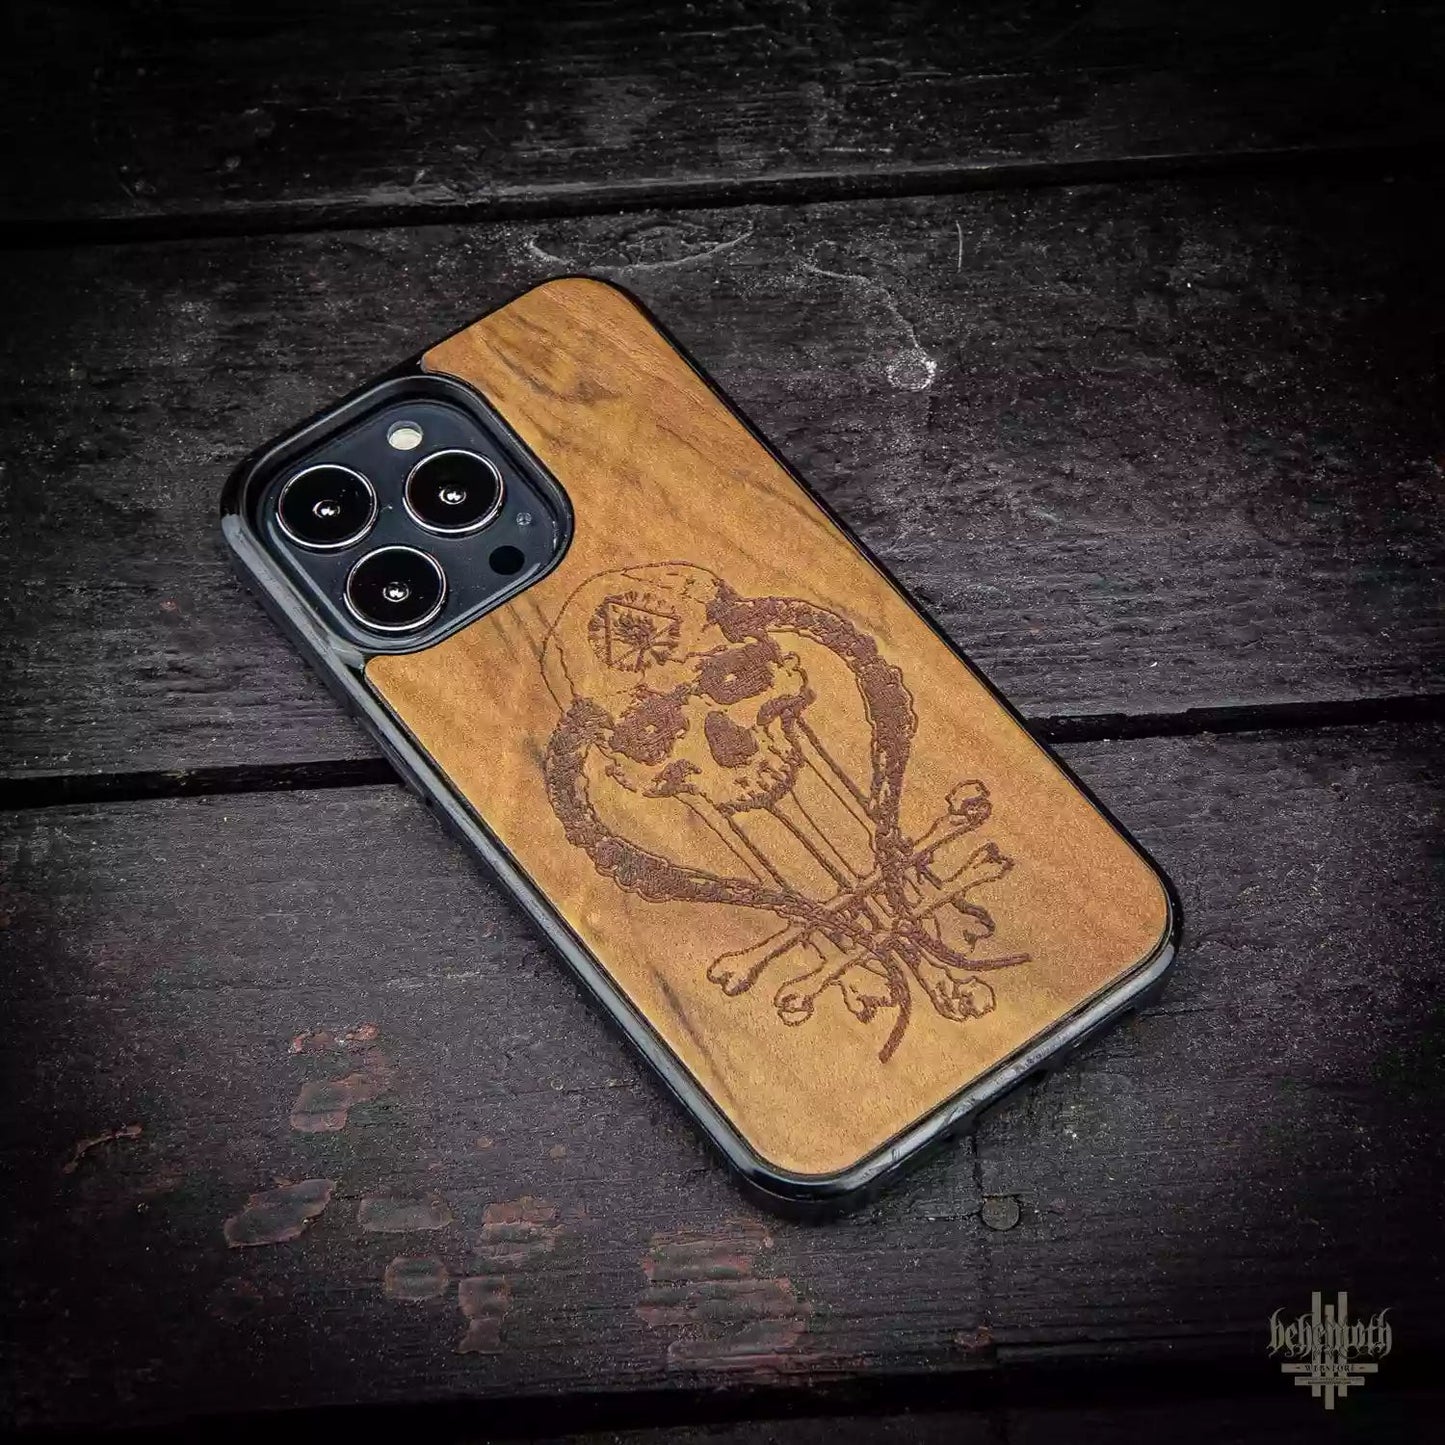 iPhone 13 Pro case with wood finishing and Behemoth 'In Absentia Dei' logo